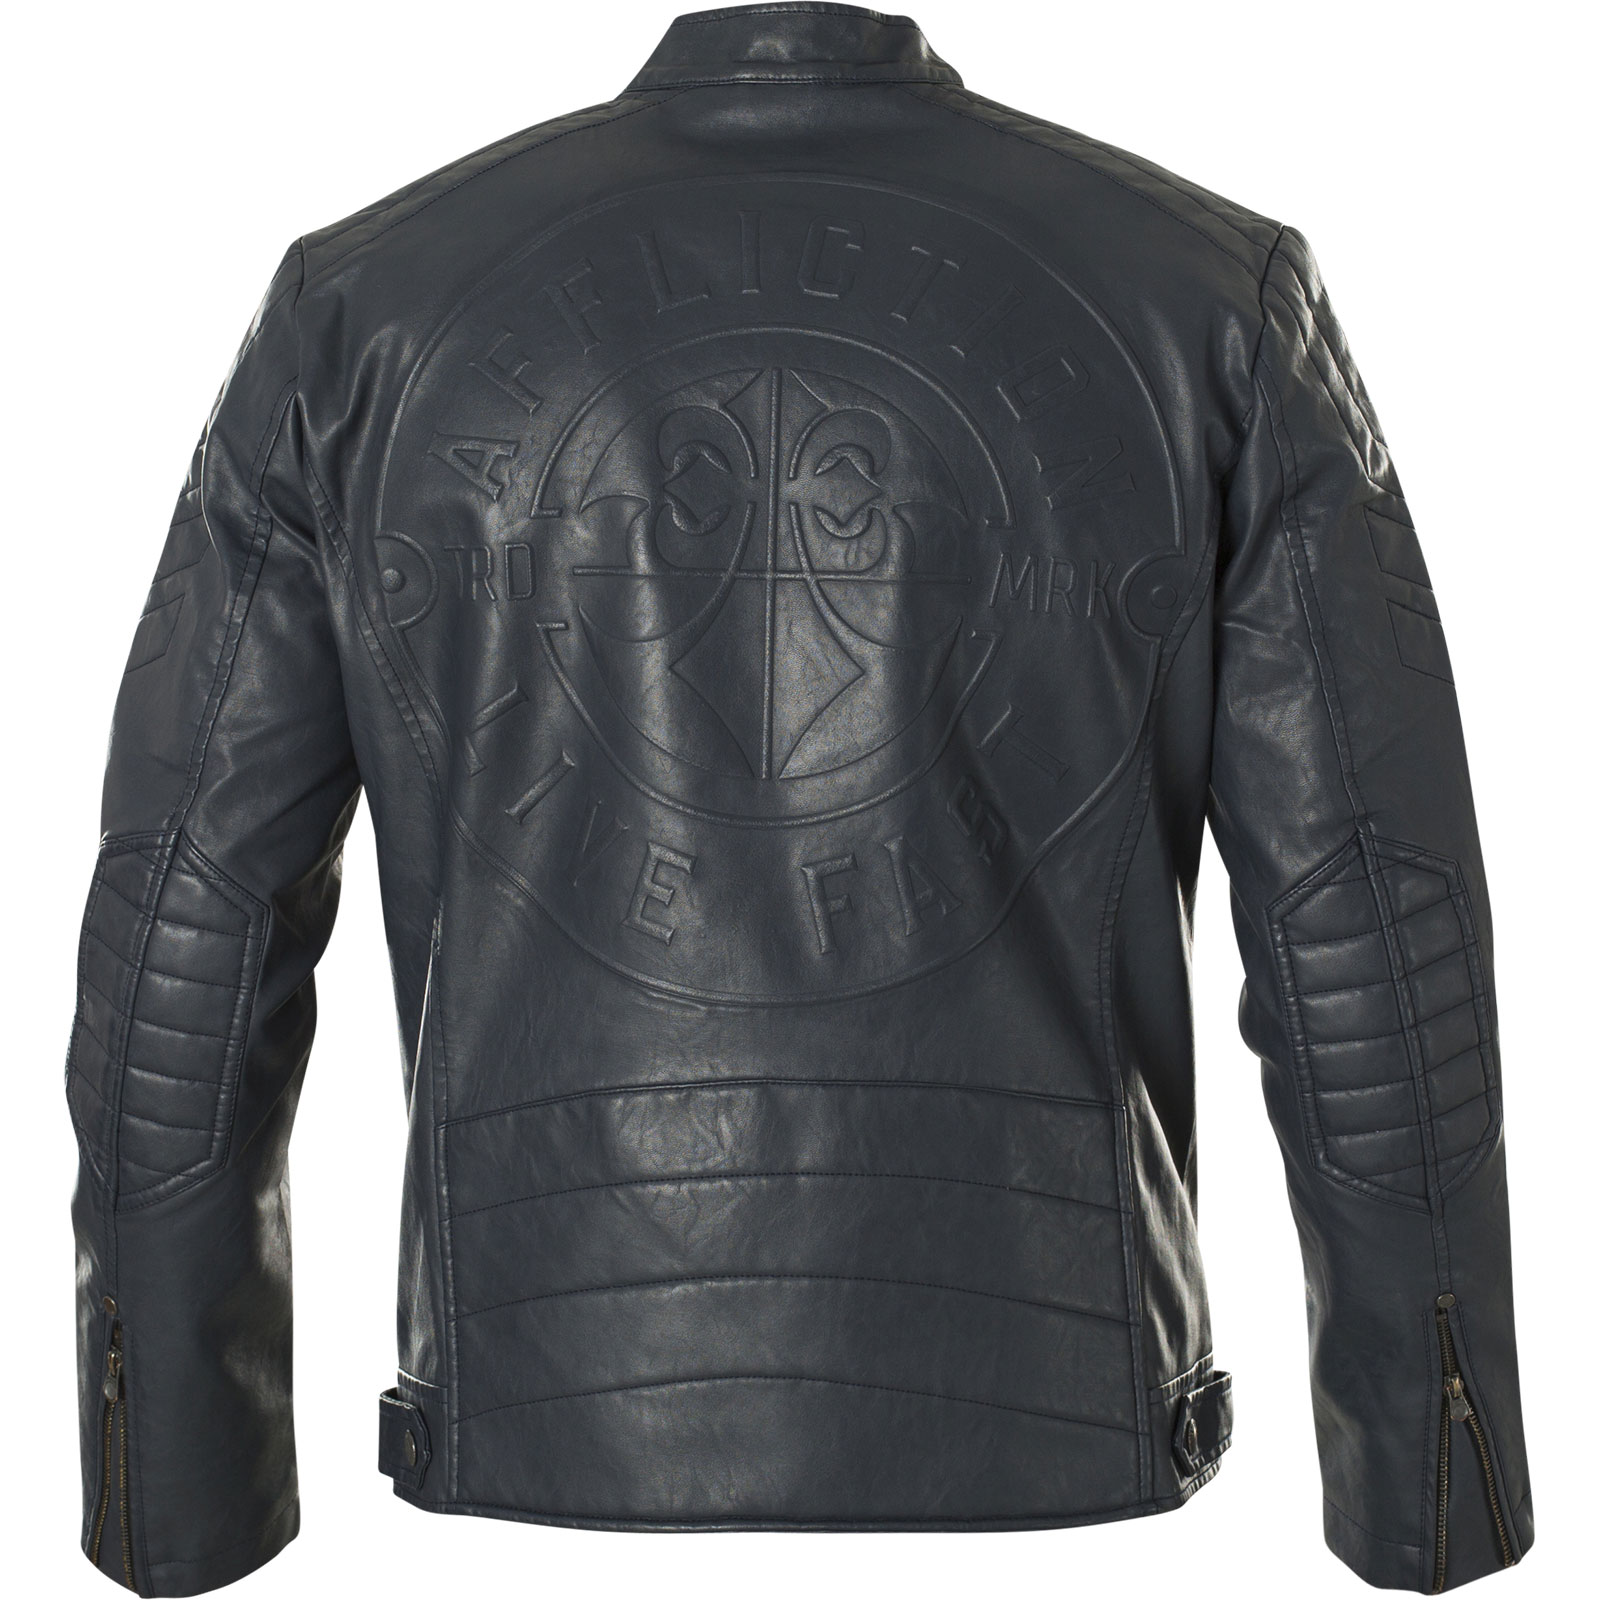 Affliction Liberty Jacket Faux leather jacket with patches